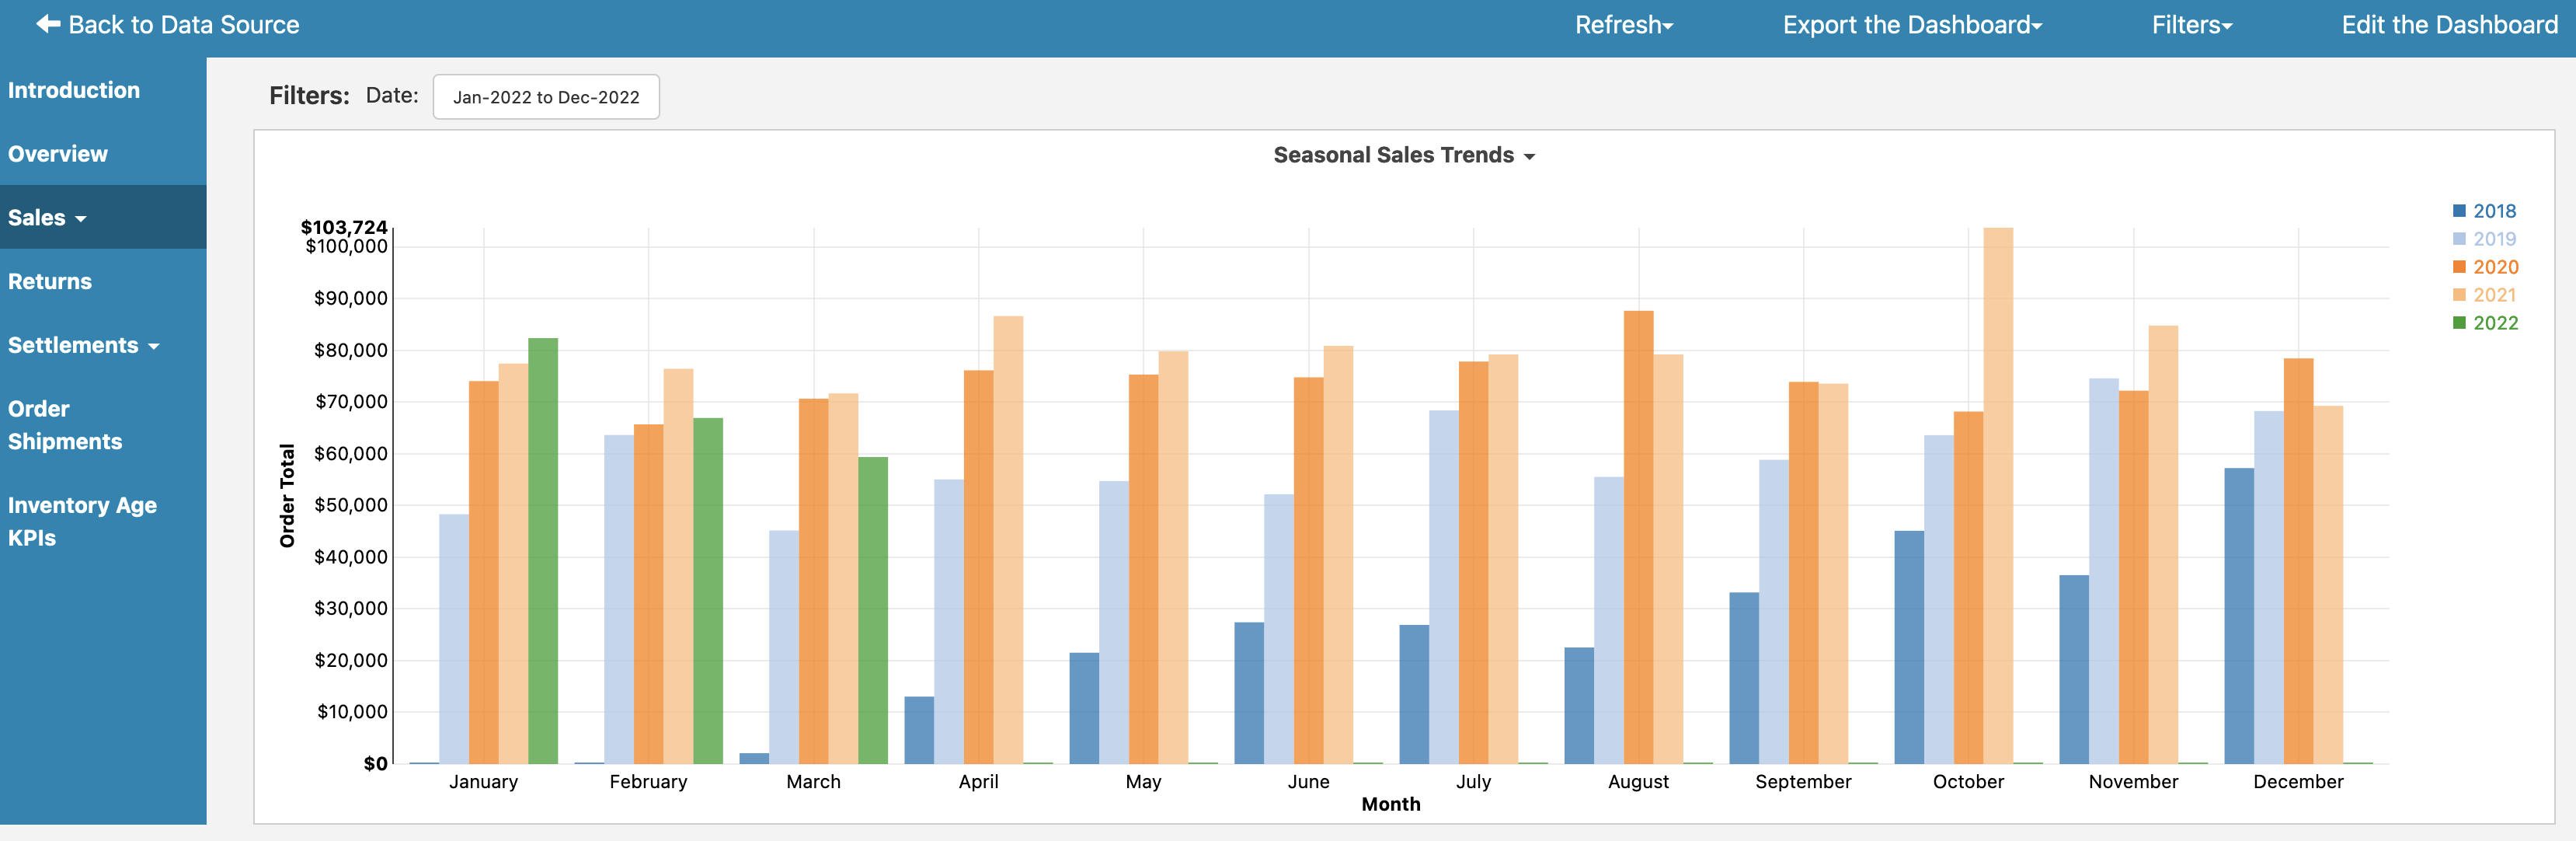 Amazon SellerCentral Dashboard Overview